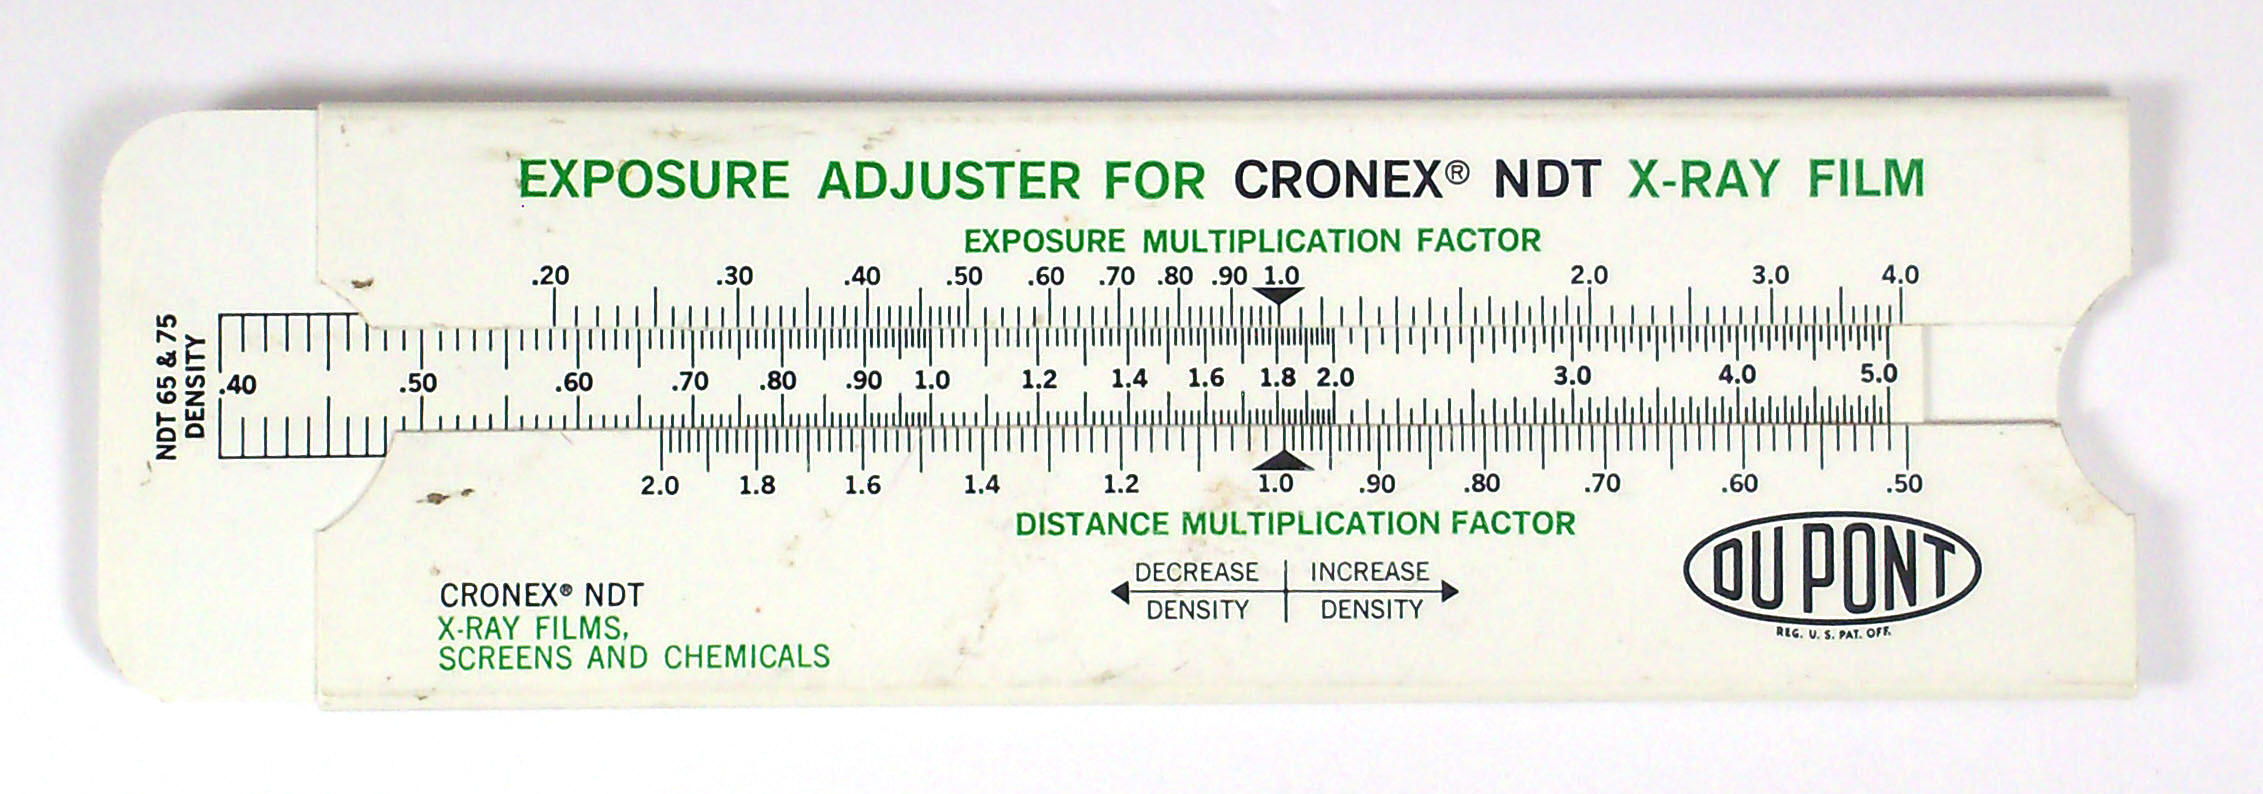 Exposure Adjuster for Chronex NDT X-Ray Film (ca. 1970s)